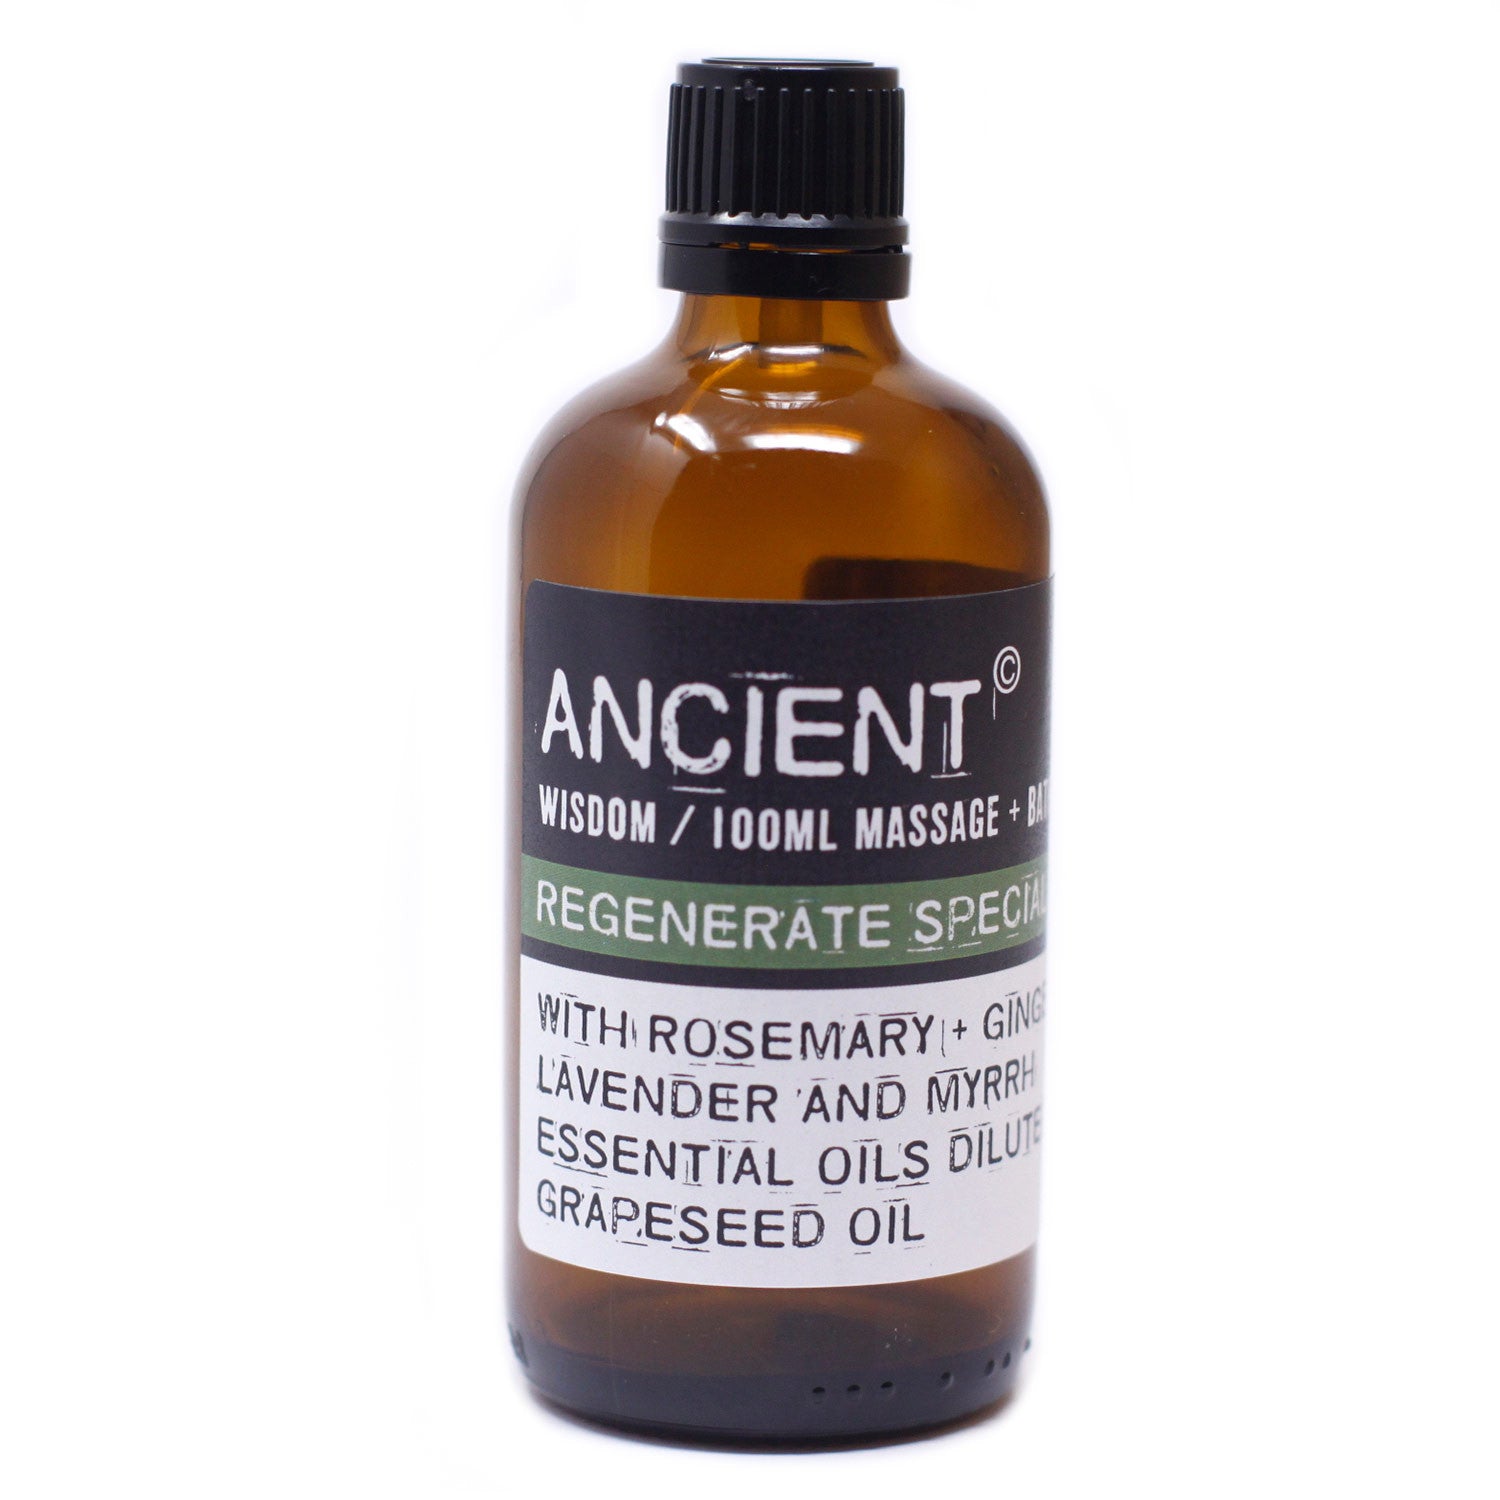 View Regenerate Special A2 Massage Oil 100ml information